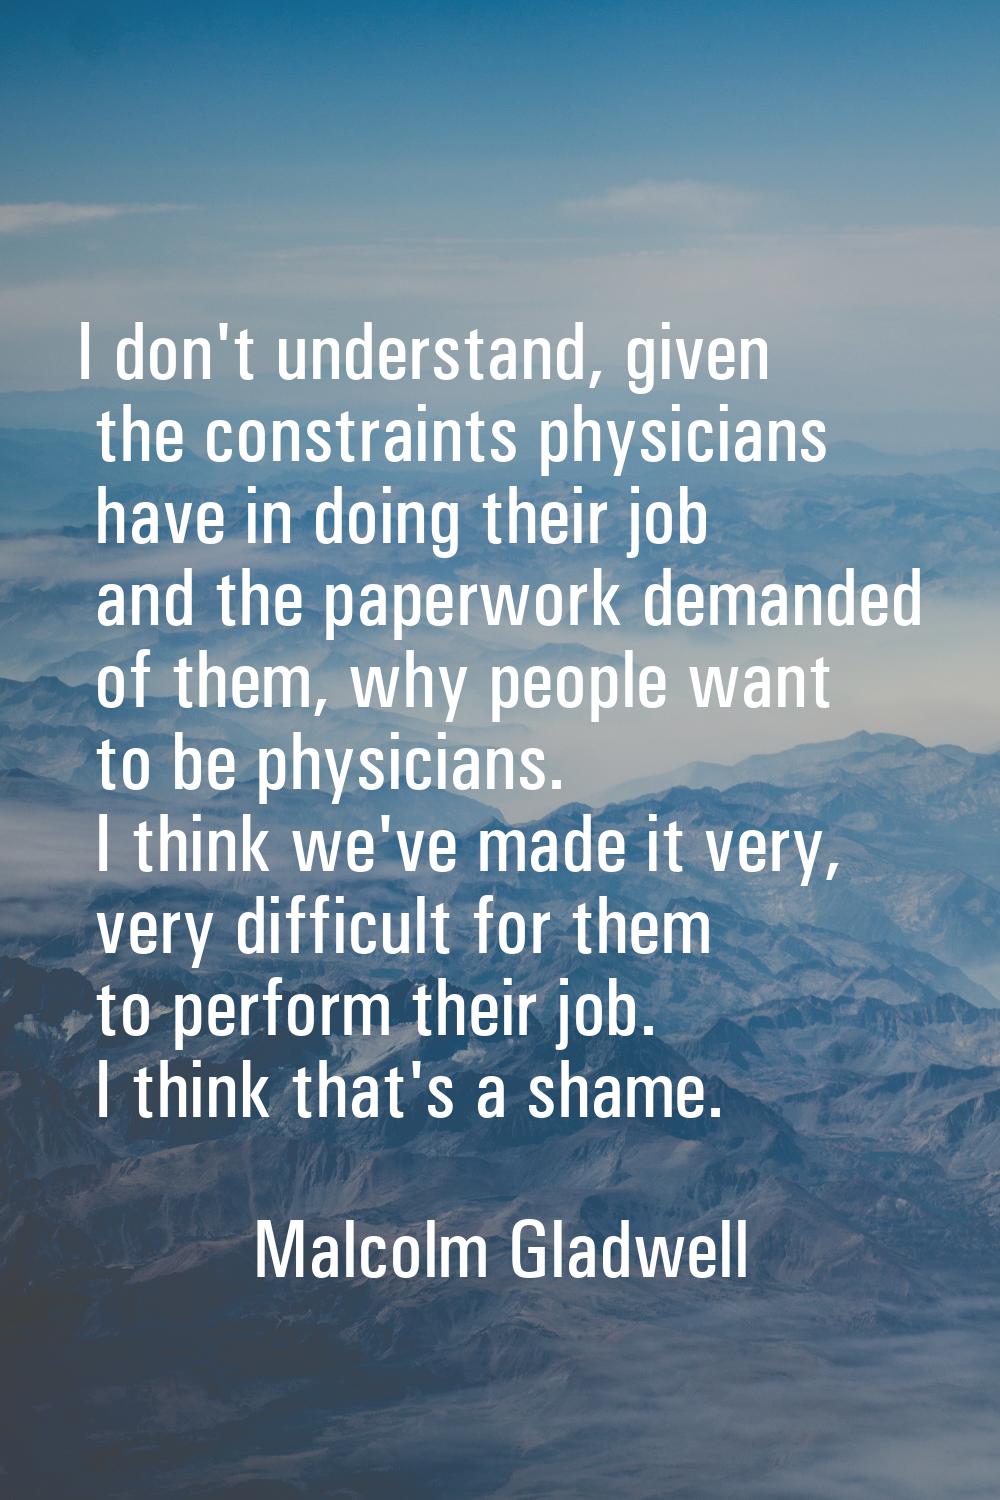 I don't understand, given the constraints physicians have in doing their job and the paperwork dema